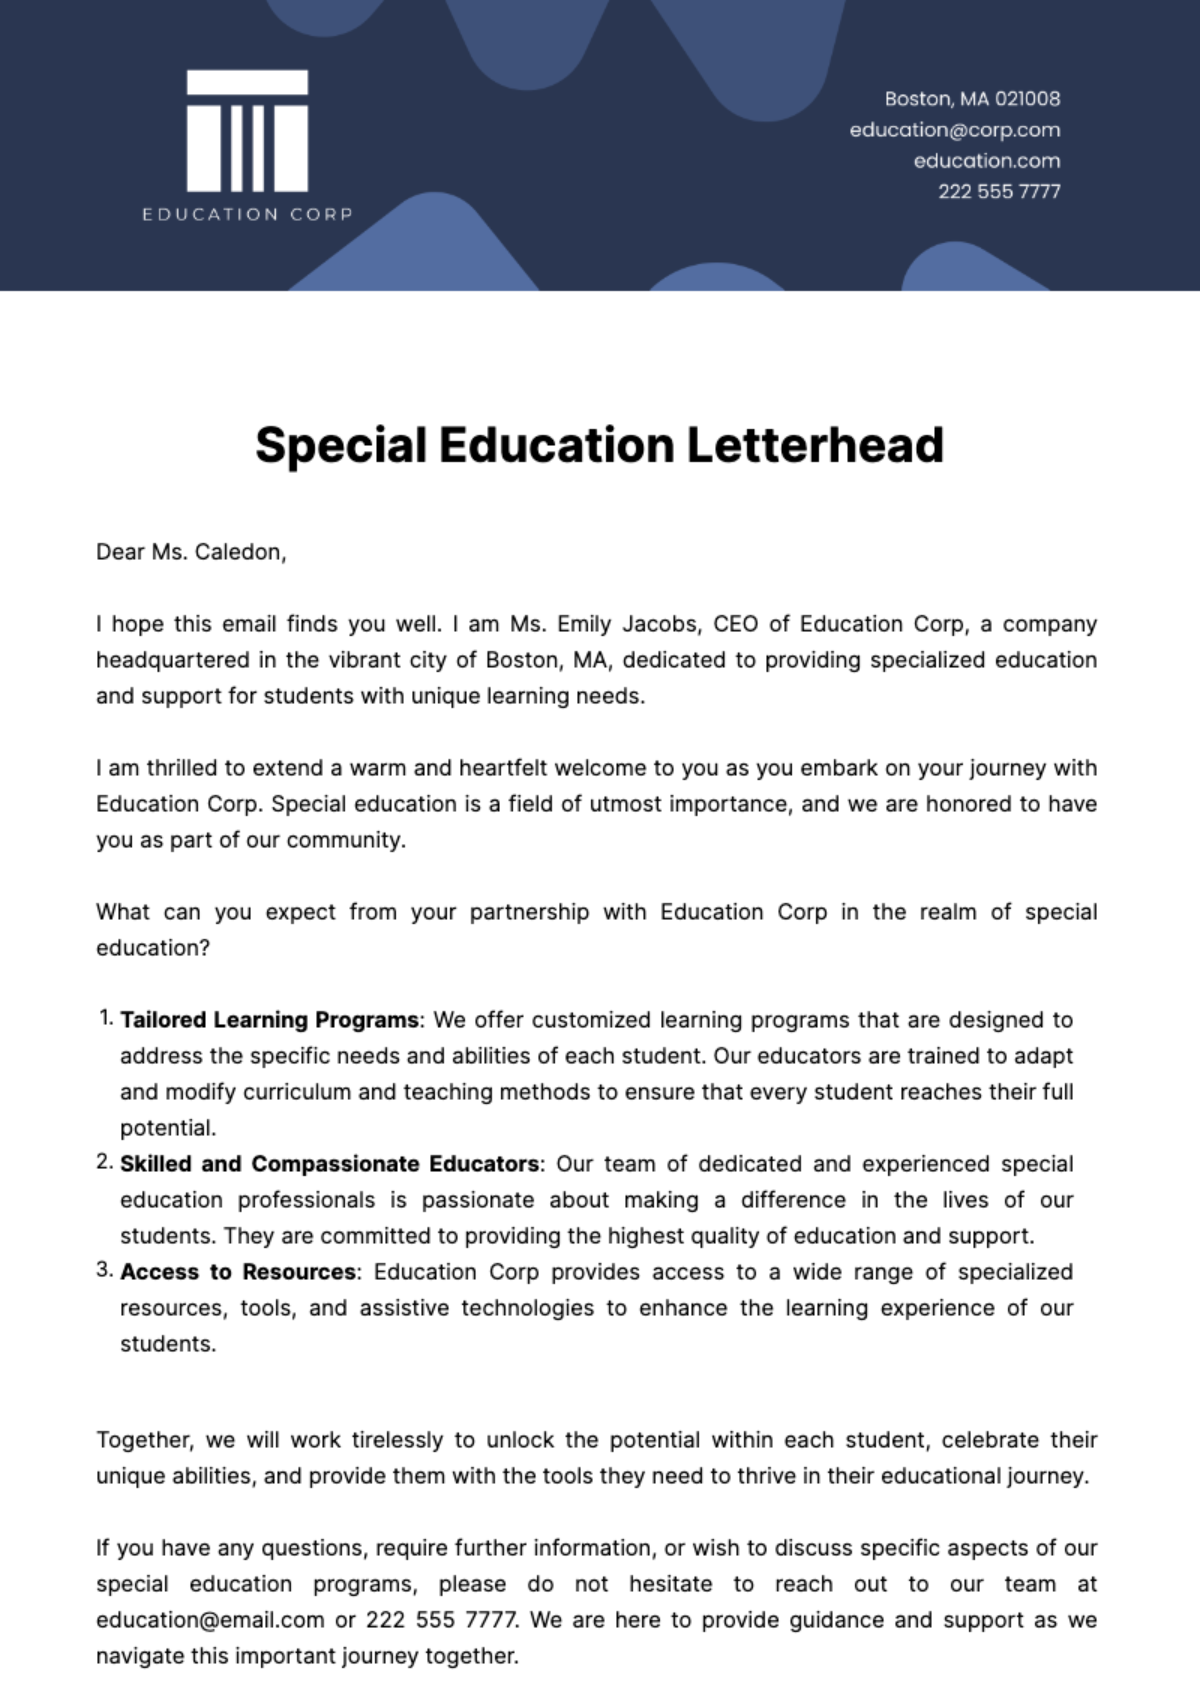 Free Special Education Letterhead Template